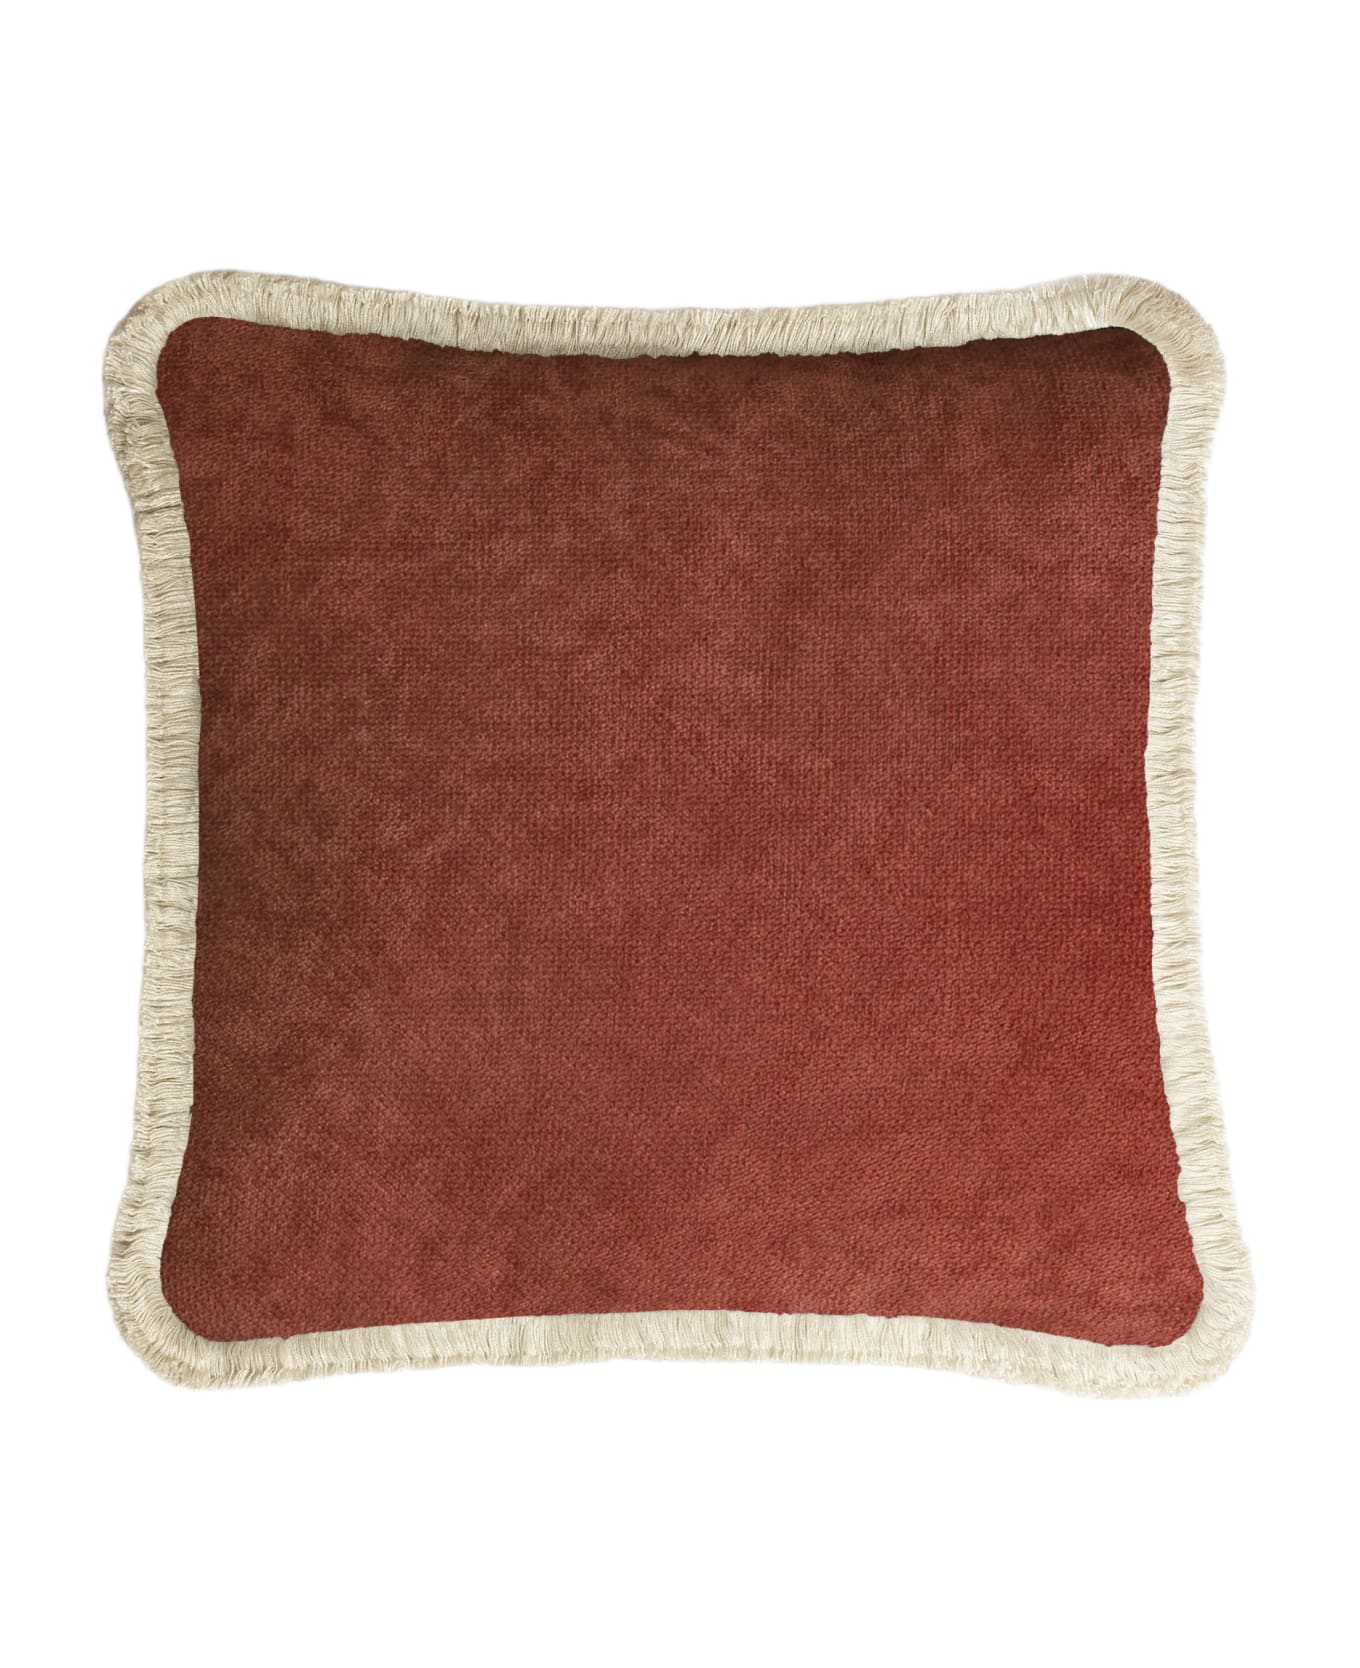 Lo Decor Happy Pillow   Brick Red Velvet With Dirty White  Fringes - Brick Red / Dirty White